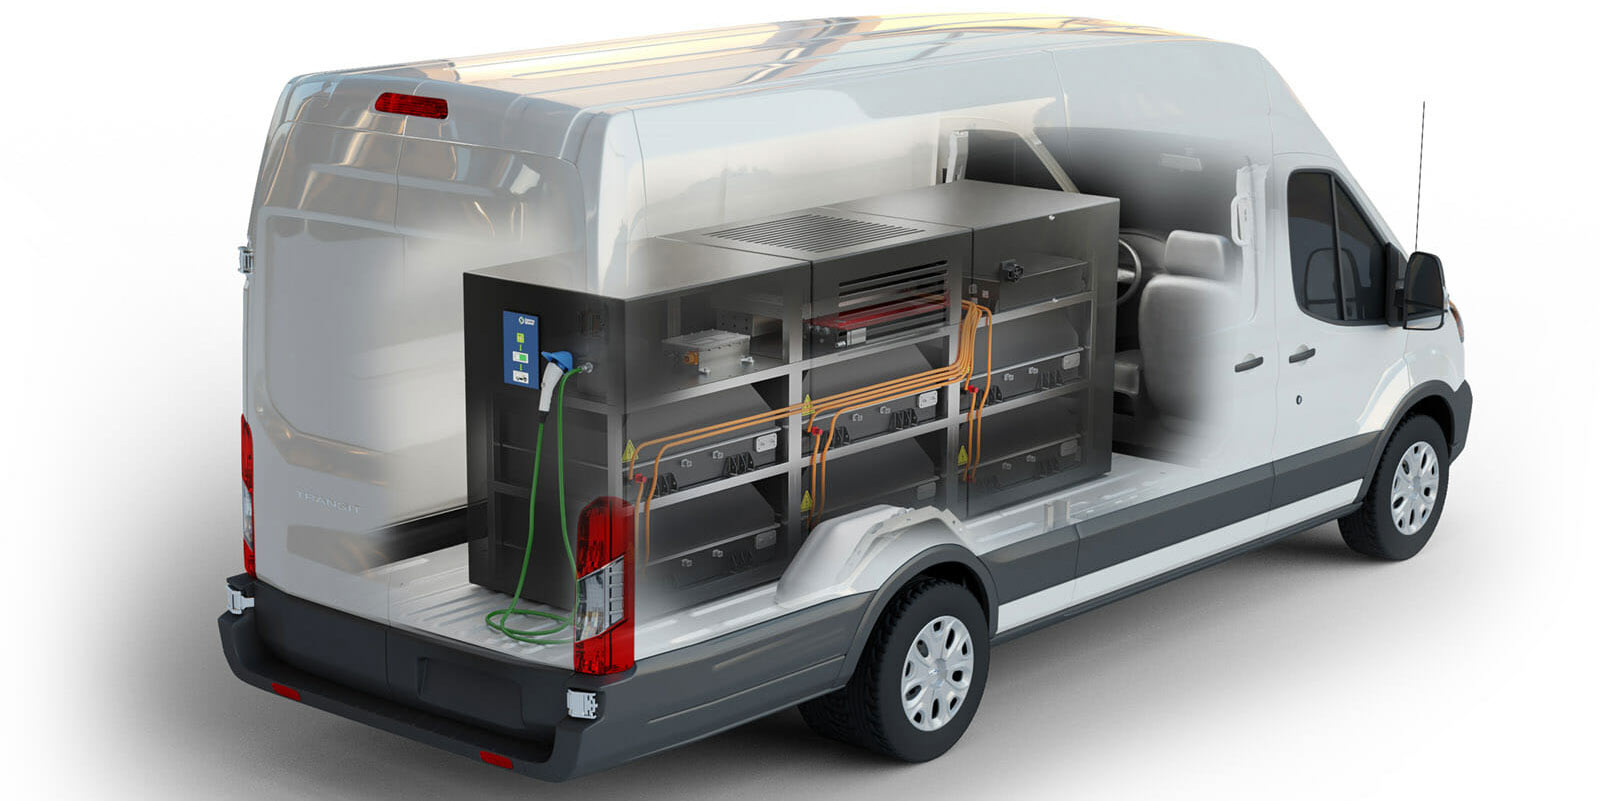 Mobile EV chargers and vans get ready for prime time Electrek